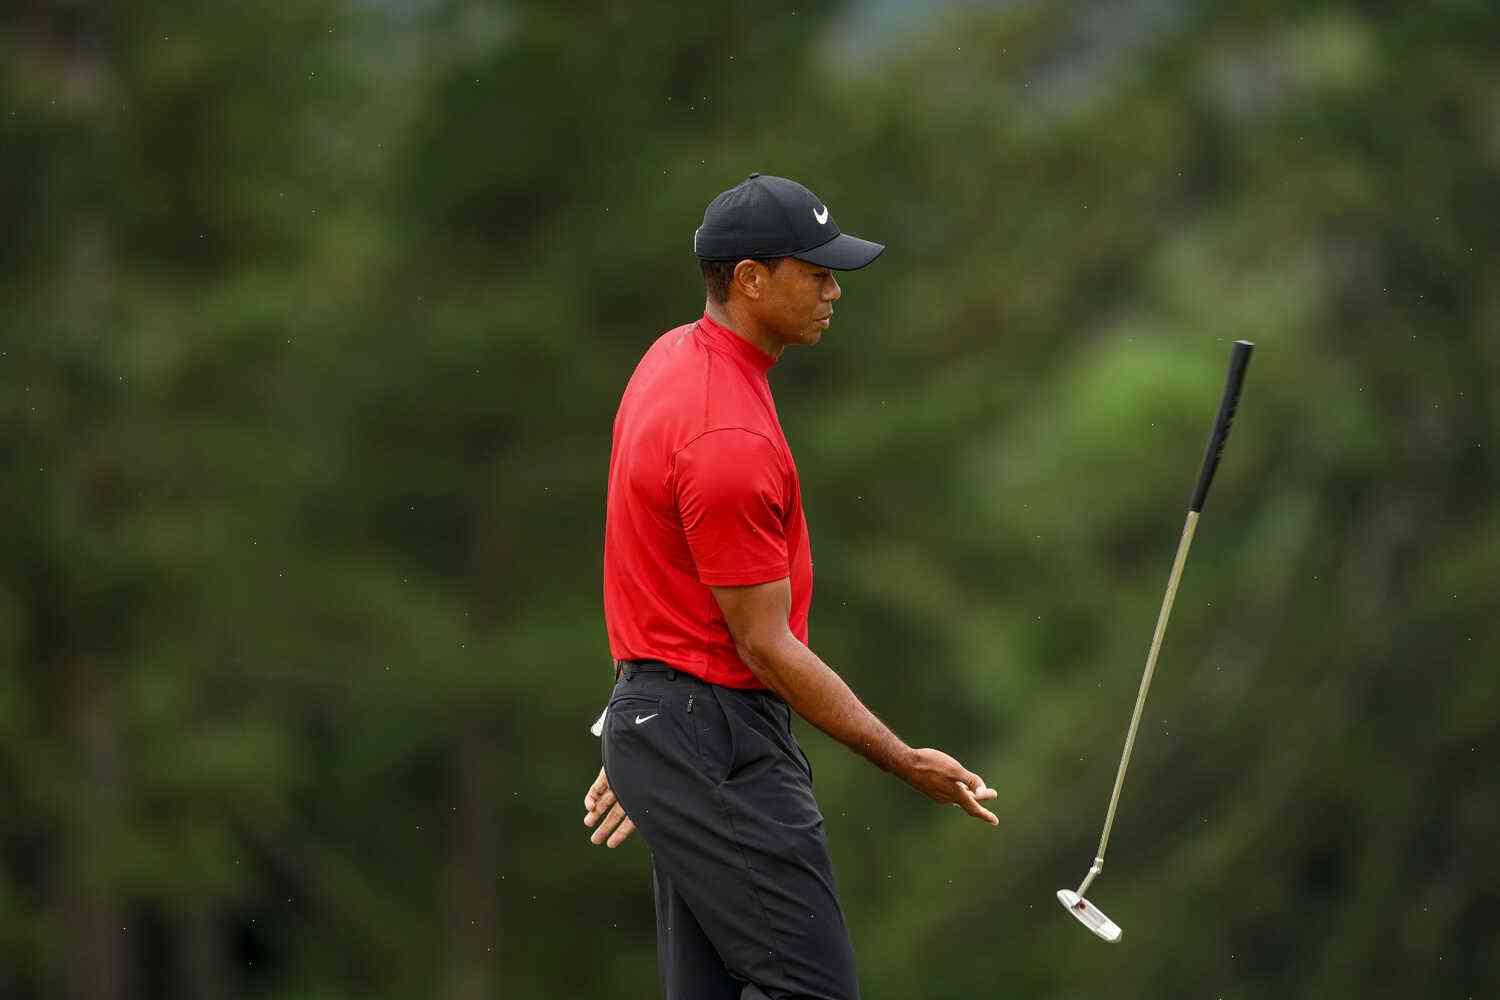 Tiger Woods 'not' looking to come back full-time to golf